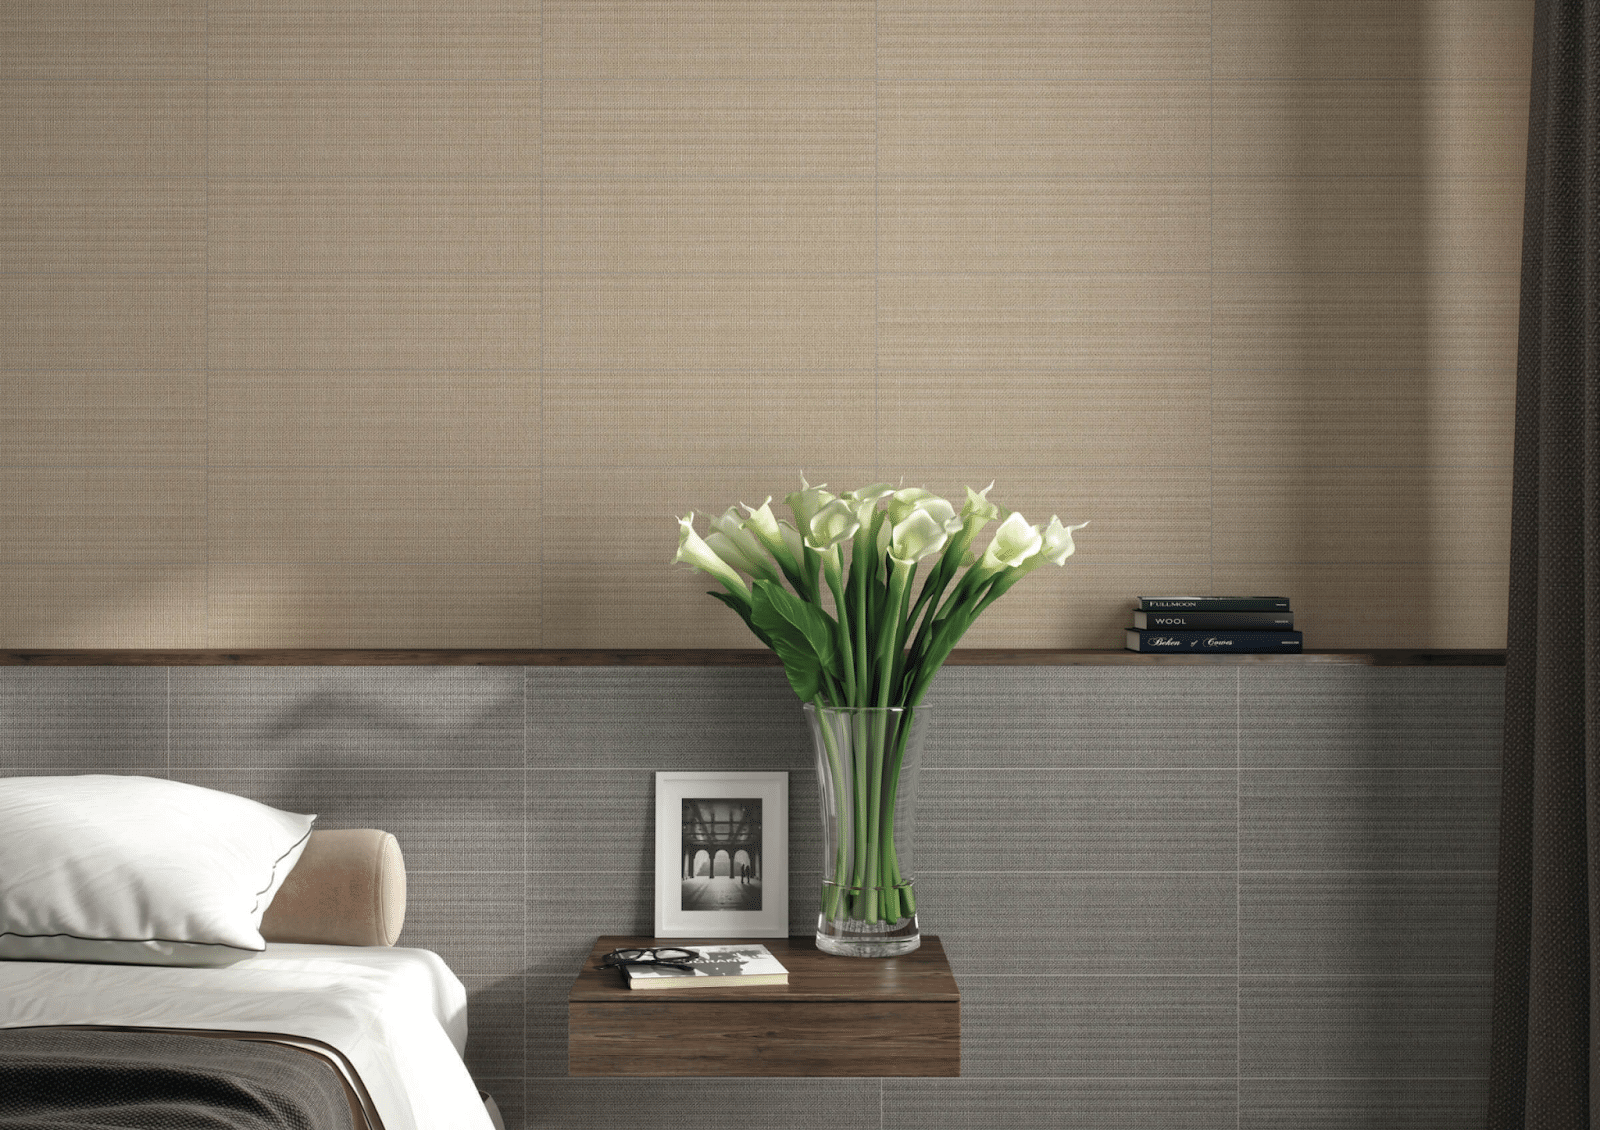 Bedroom with gray and beige textured tile wall